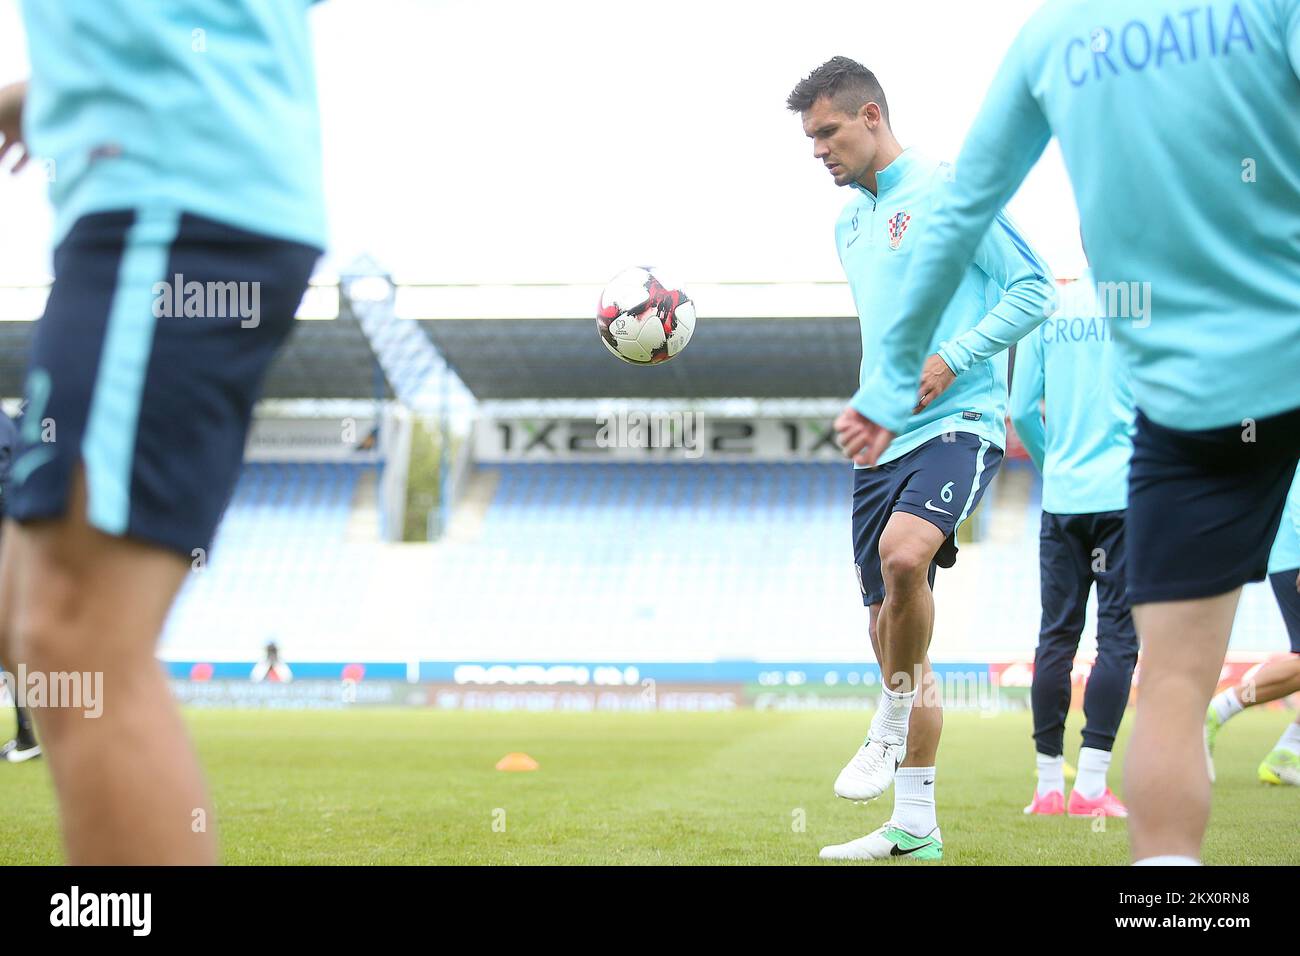 10.06.2017., Stadium Laugardalsvollur, Reykjavik, Iceland - Training of the Croatian Football Team on the day before the qualifying match with Iceland for the World Championships in Russia in 2018. Dejan Lovren. Photo: Goran Stanzl/PIXSELL Stock Photo